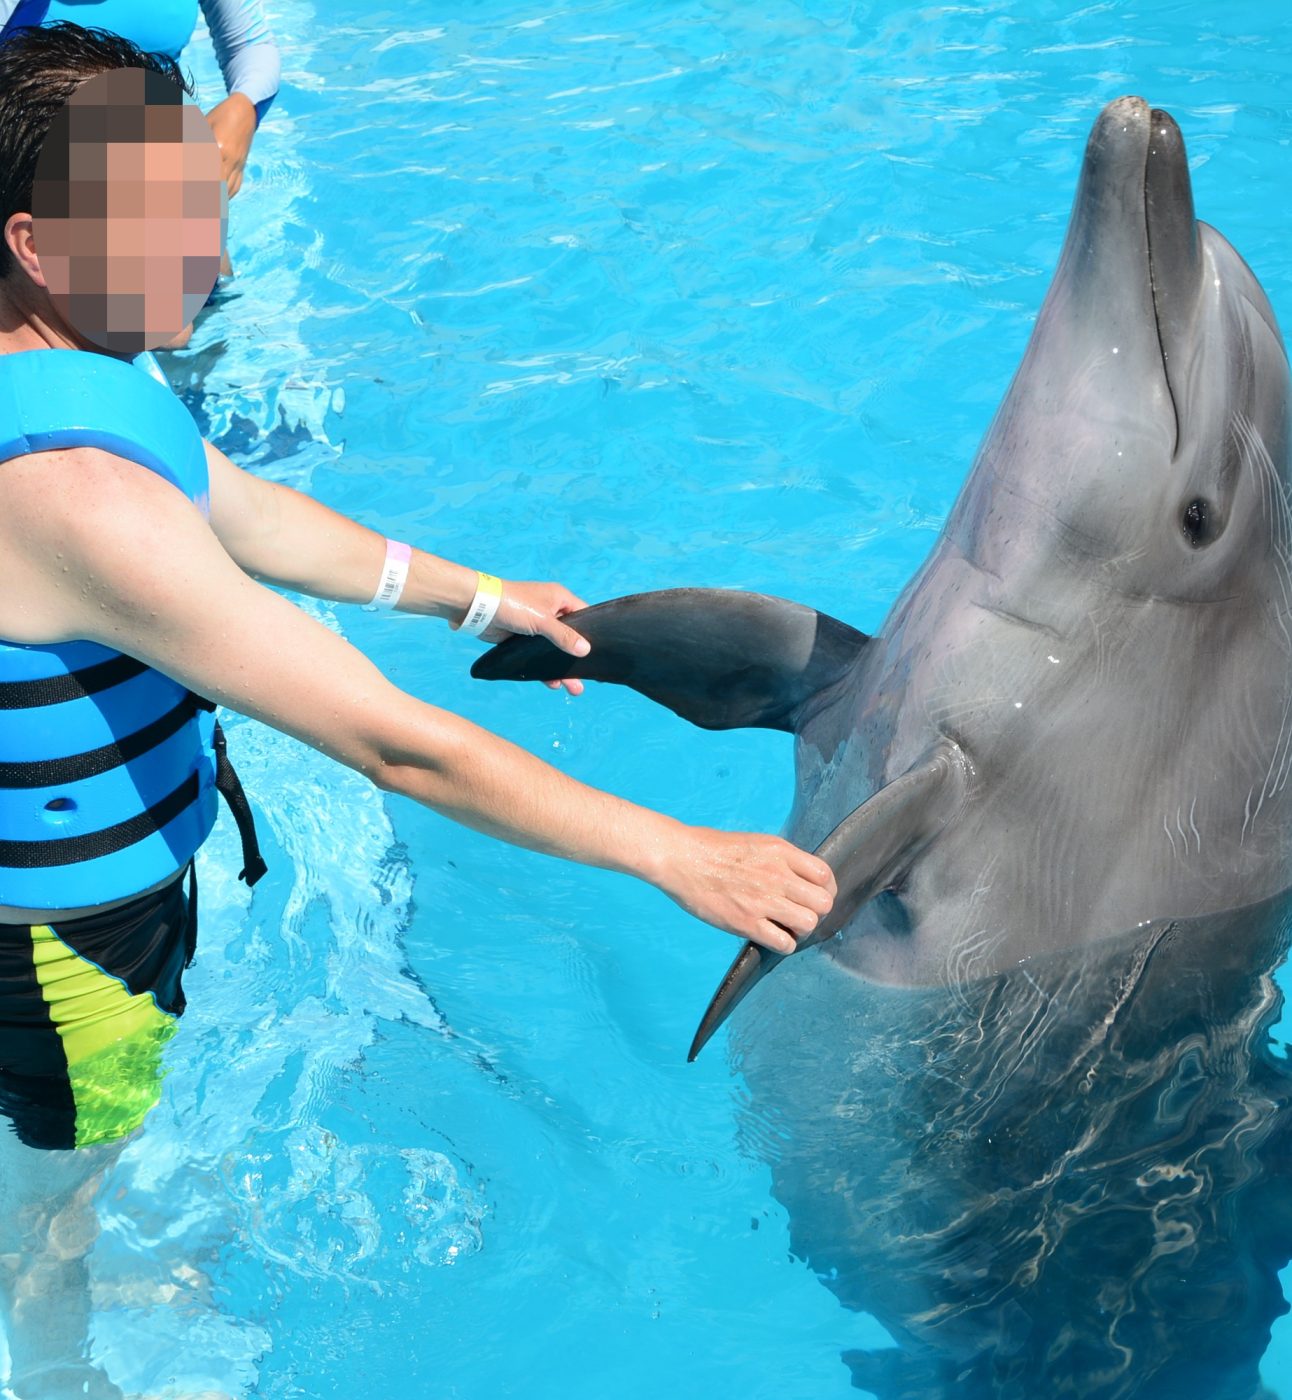 A man standing in a pool with a dolphin which is emerging upright from the water. The man is holding onto the dolphin's fins.